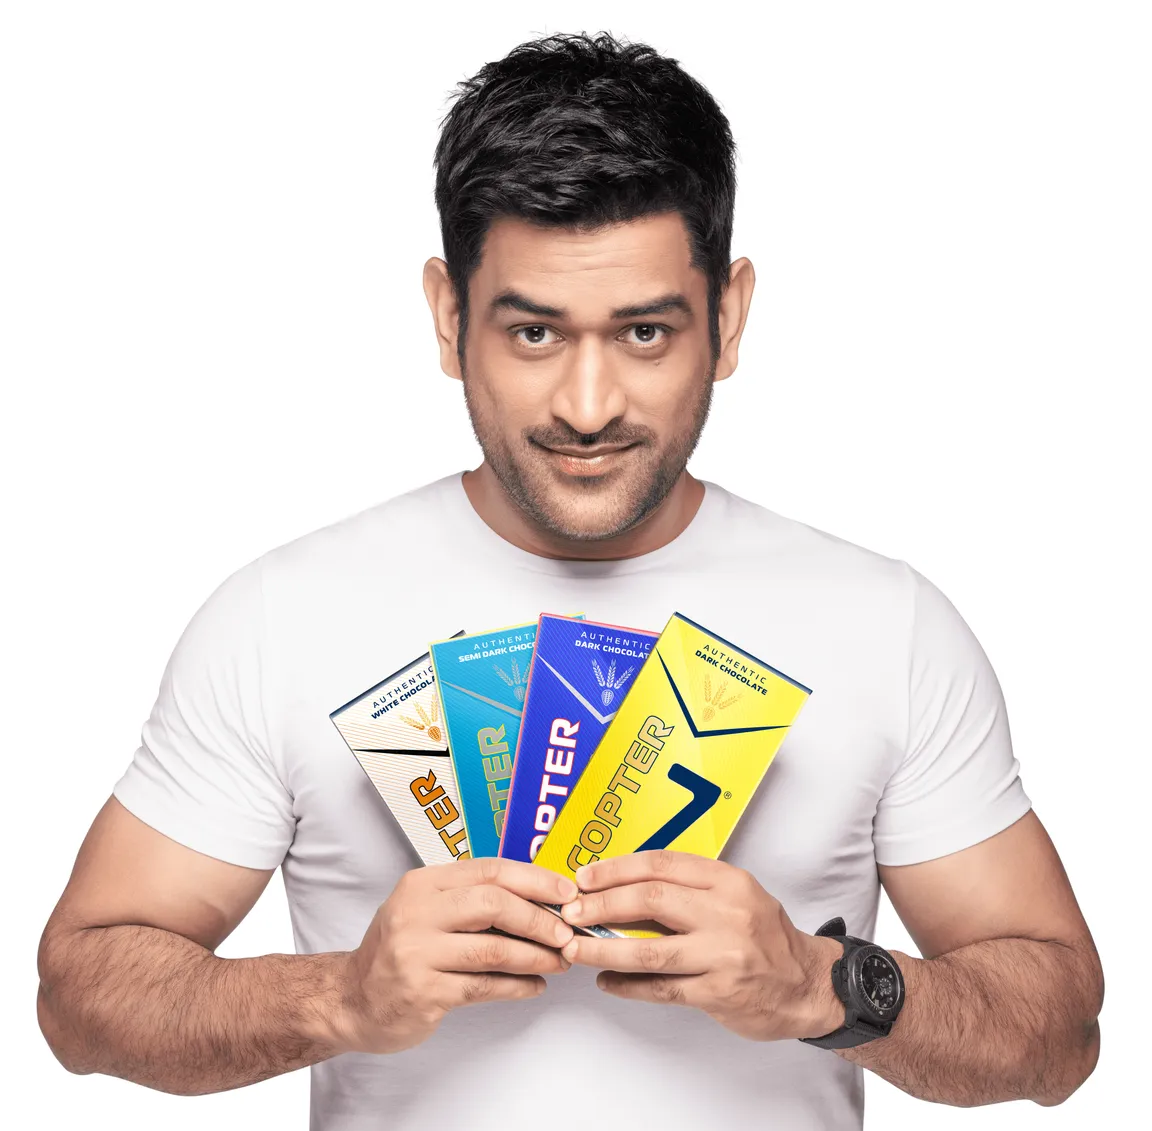 World Chocolate Day: This artisanal chocolate brand is inspired by MS Dhoni